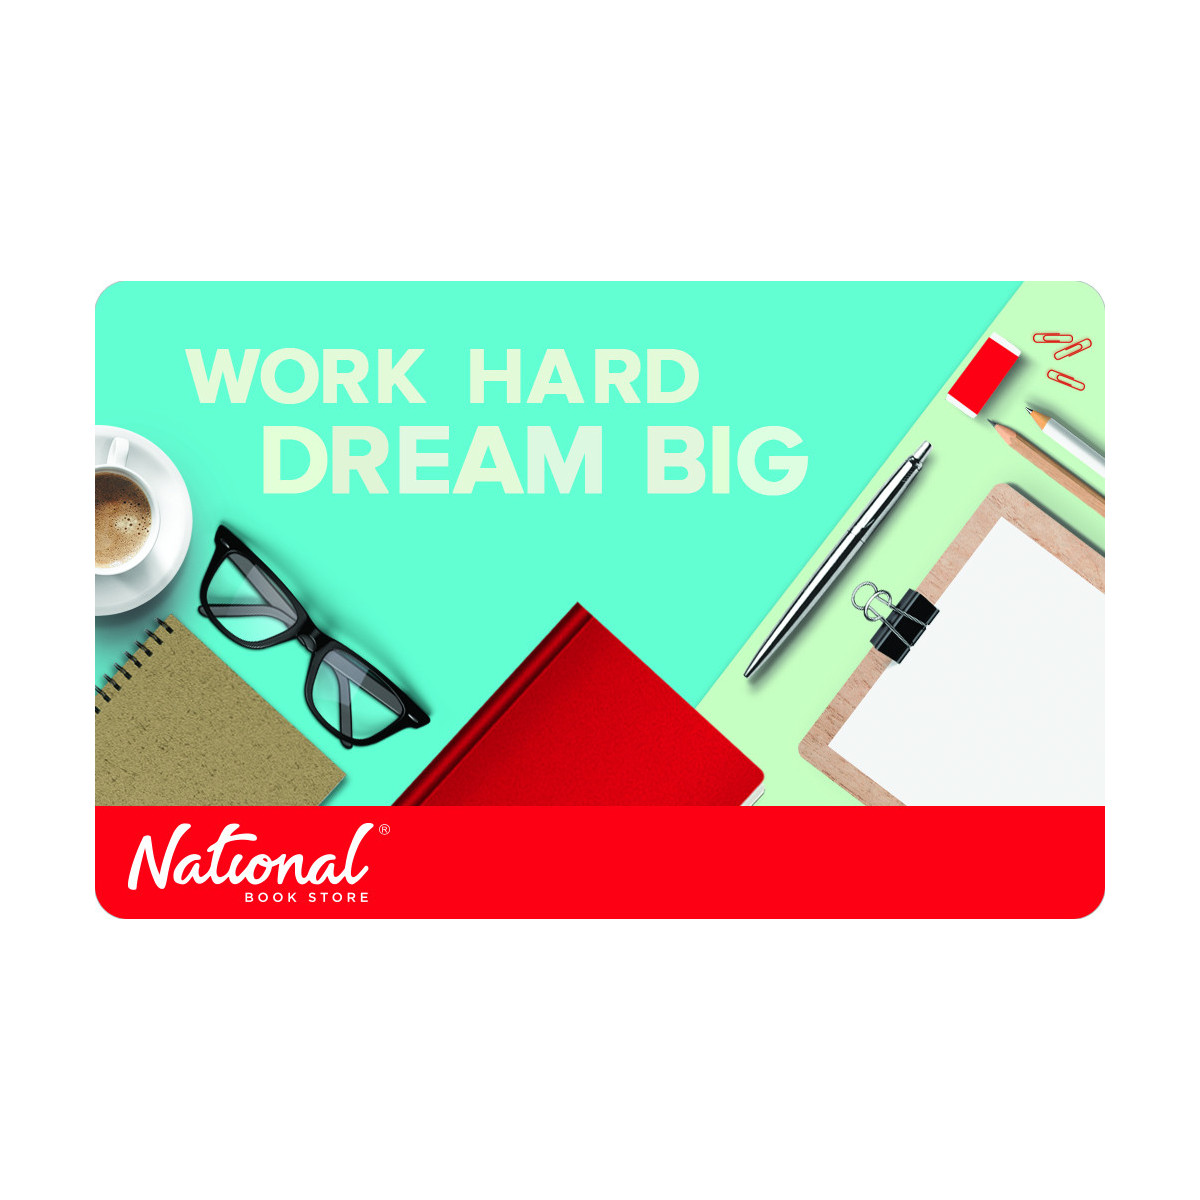 NBS GIFT CARD P300 (VALID FOR IN-STORE PURCHASE) - DREAM BIG DESIGN